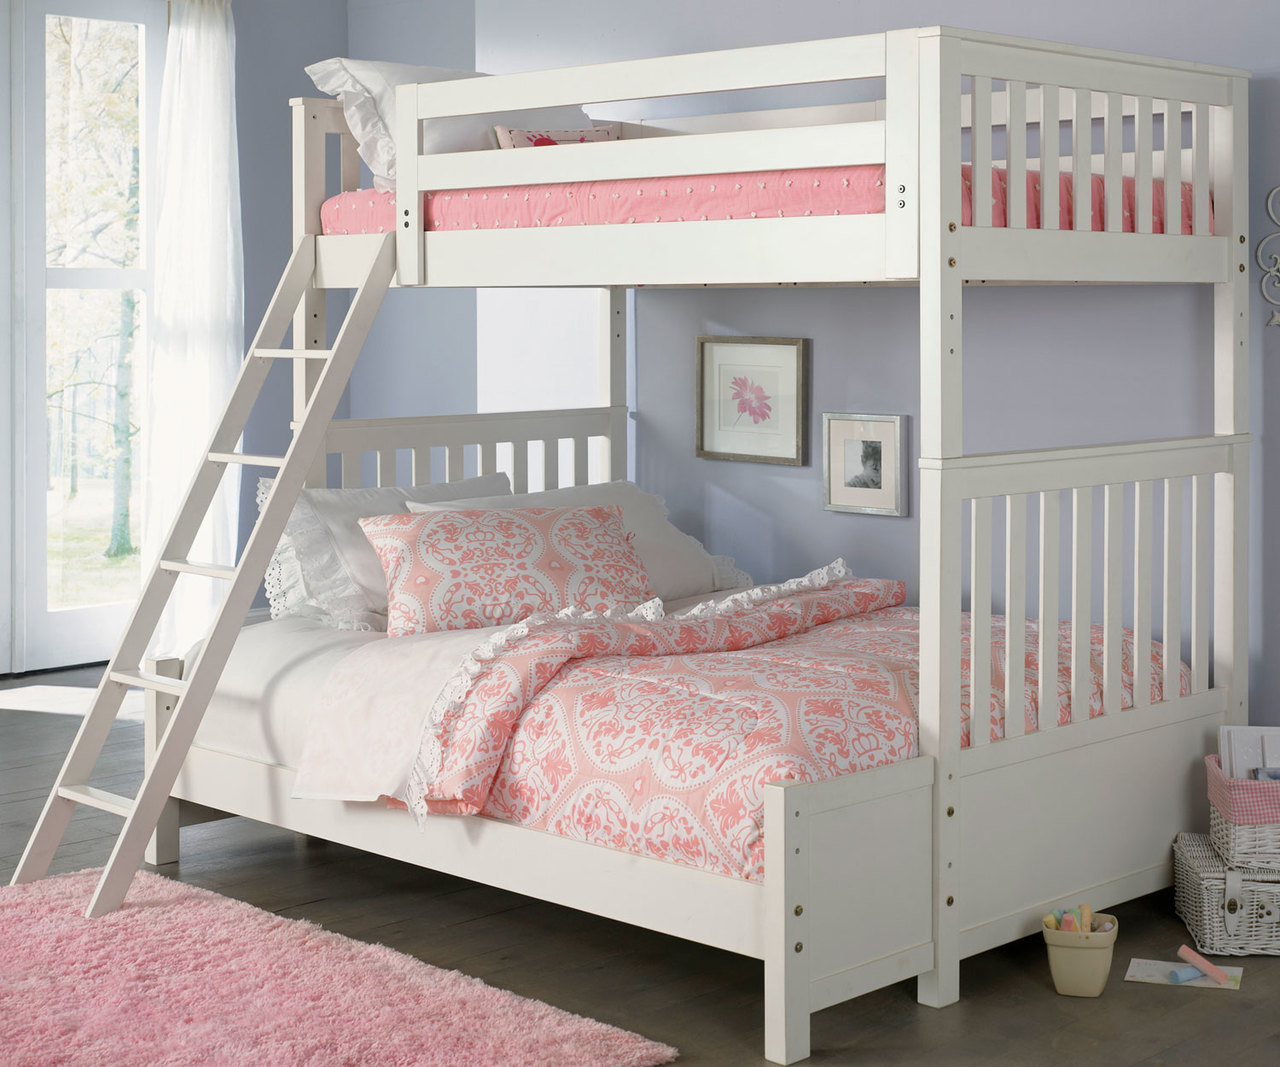 Full Bunk Beds For Your Kids Room, Girls Bunk Beds Twin Over Full